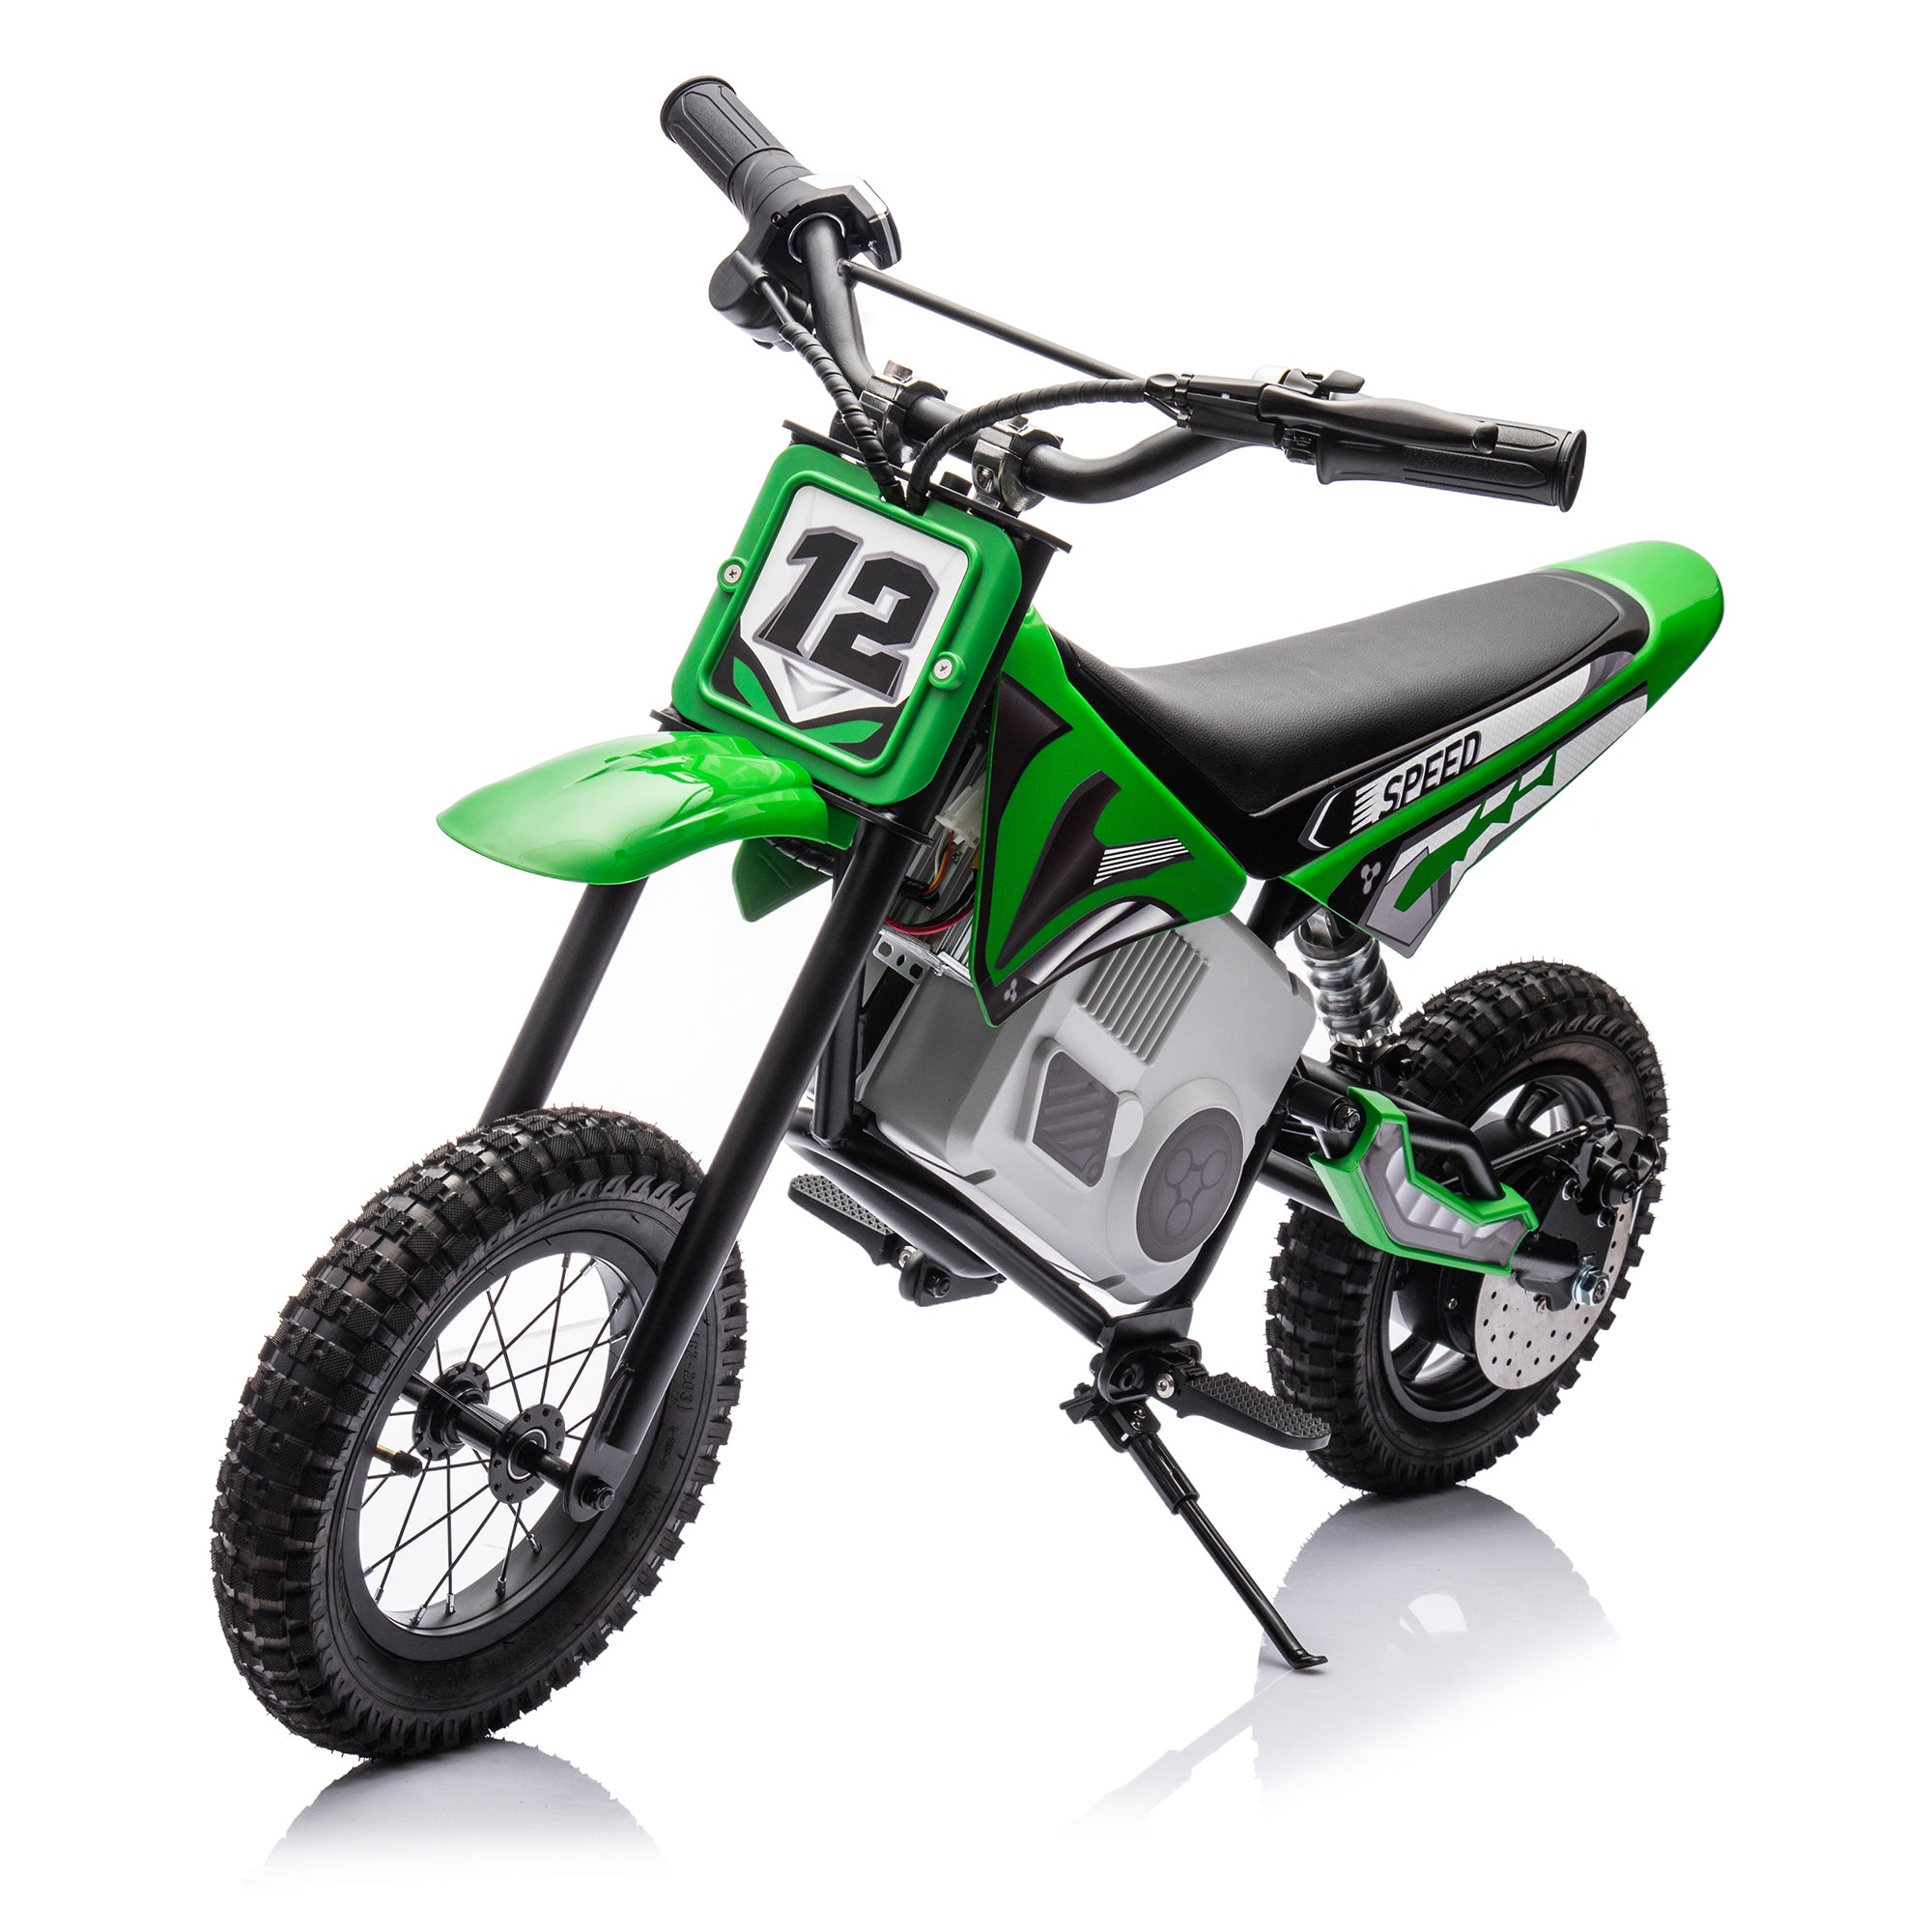 🆓🚛 36V Electric Mini Dirt Motorcycle for Kids, 350W Xxxl Motorcycle, Stepless Variable Speed Drive, Disc Brake, No Chain, Steady Acceleration, Horn, Power Display, Rate Display, 176 Pounds for 50M Or More, Age 14+, Green